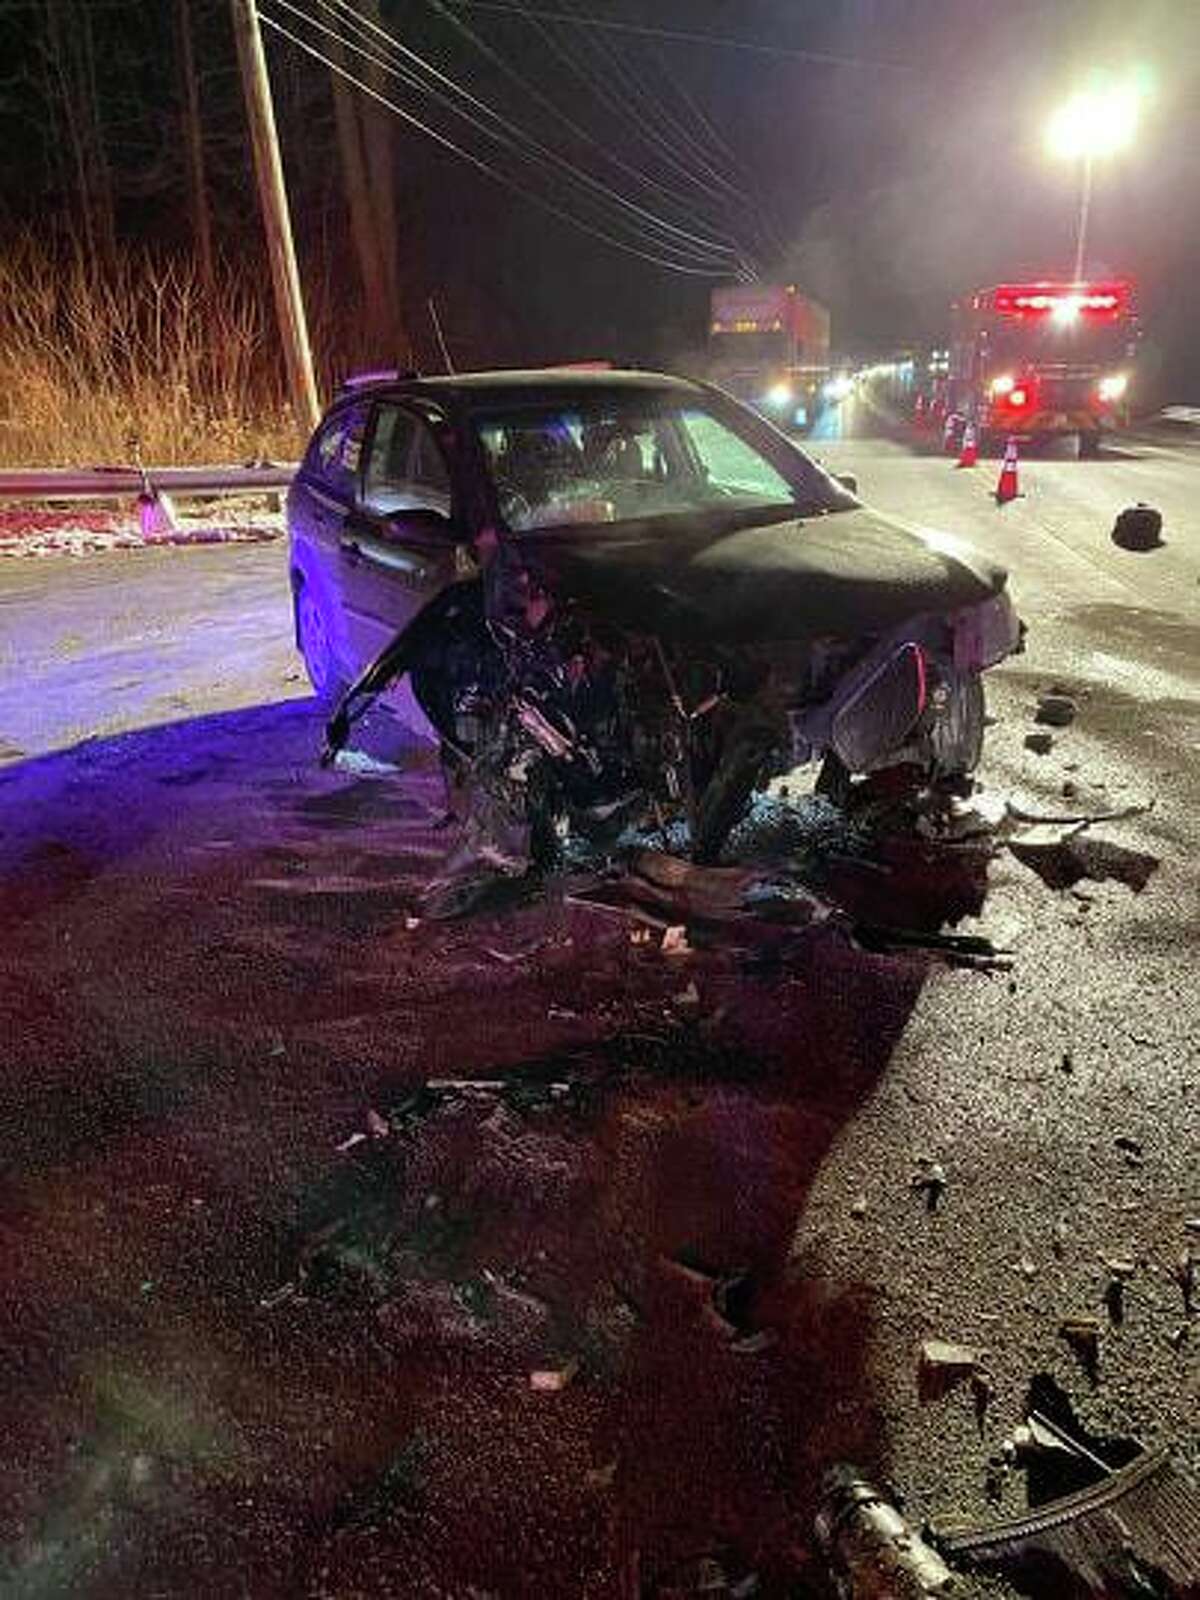 A three-car crash on Route 44 near Old North Road in Barkhamsted on Friday, Dec. 20 caused heavy delays and damage to involved vehicles. As of mid-day Dec. 21 only minor injuries had been reported.